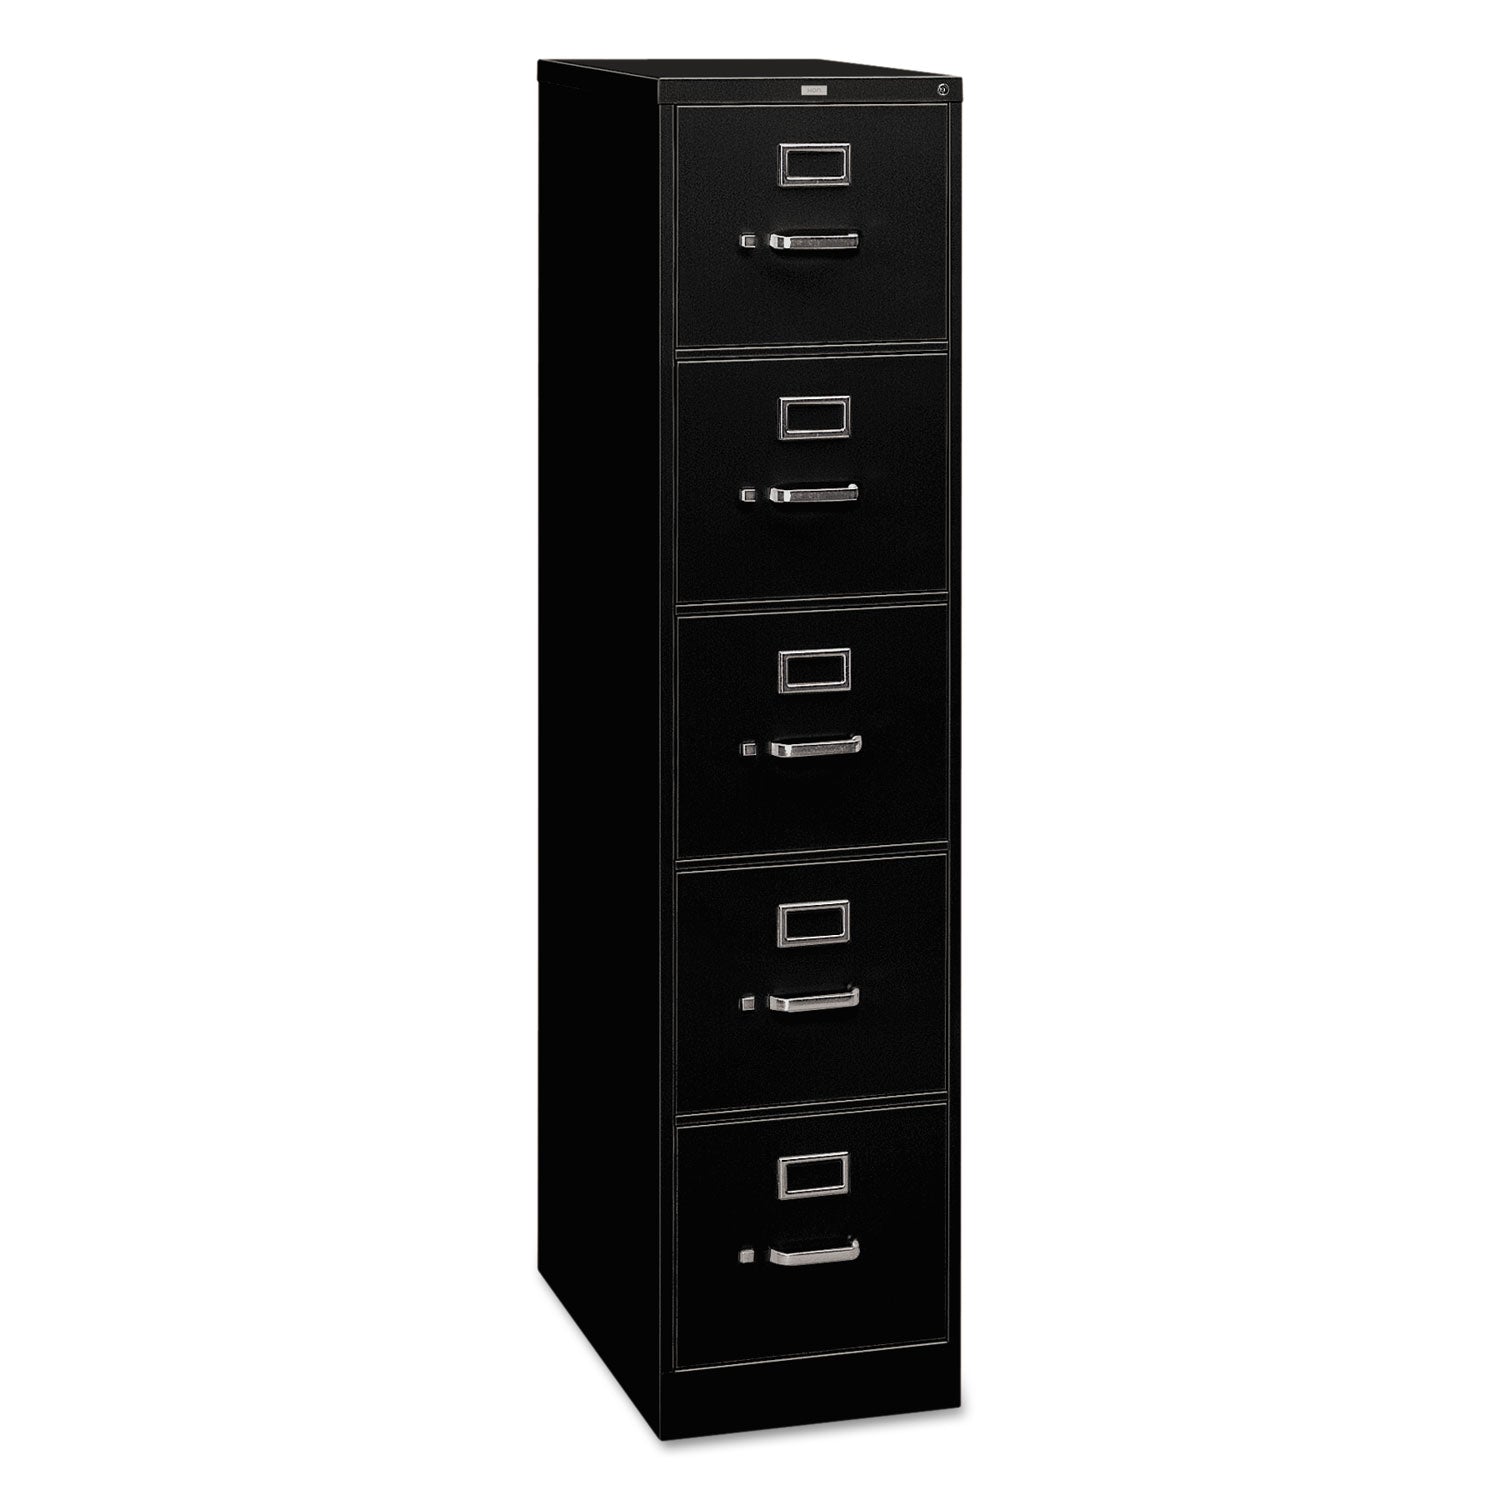 310 Series Vertical File, 5 Letter-Size File Drawers, Black, 15" x 26.5" x 60 - 